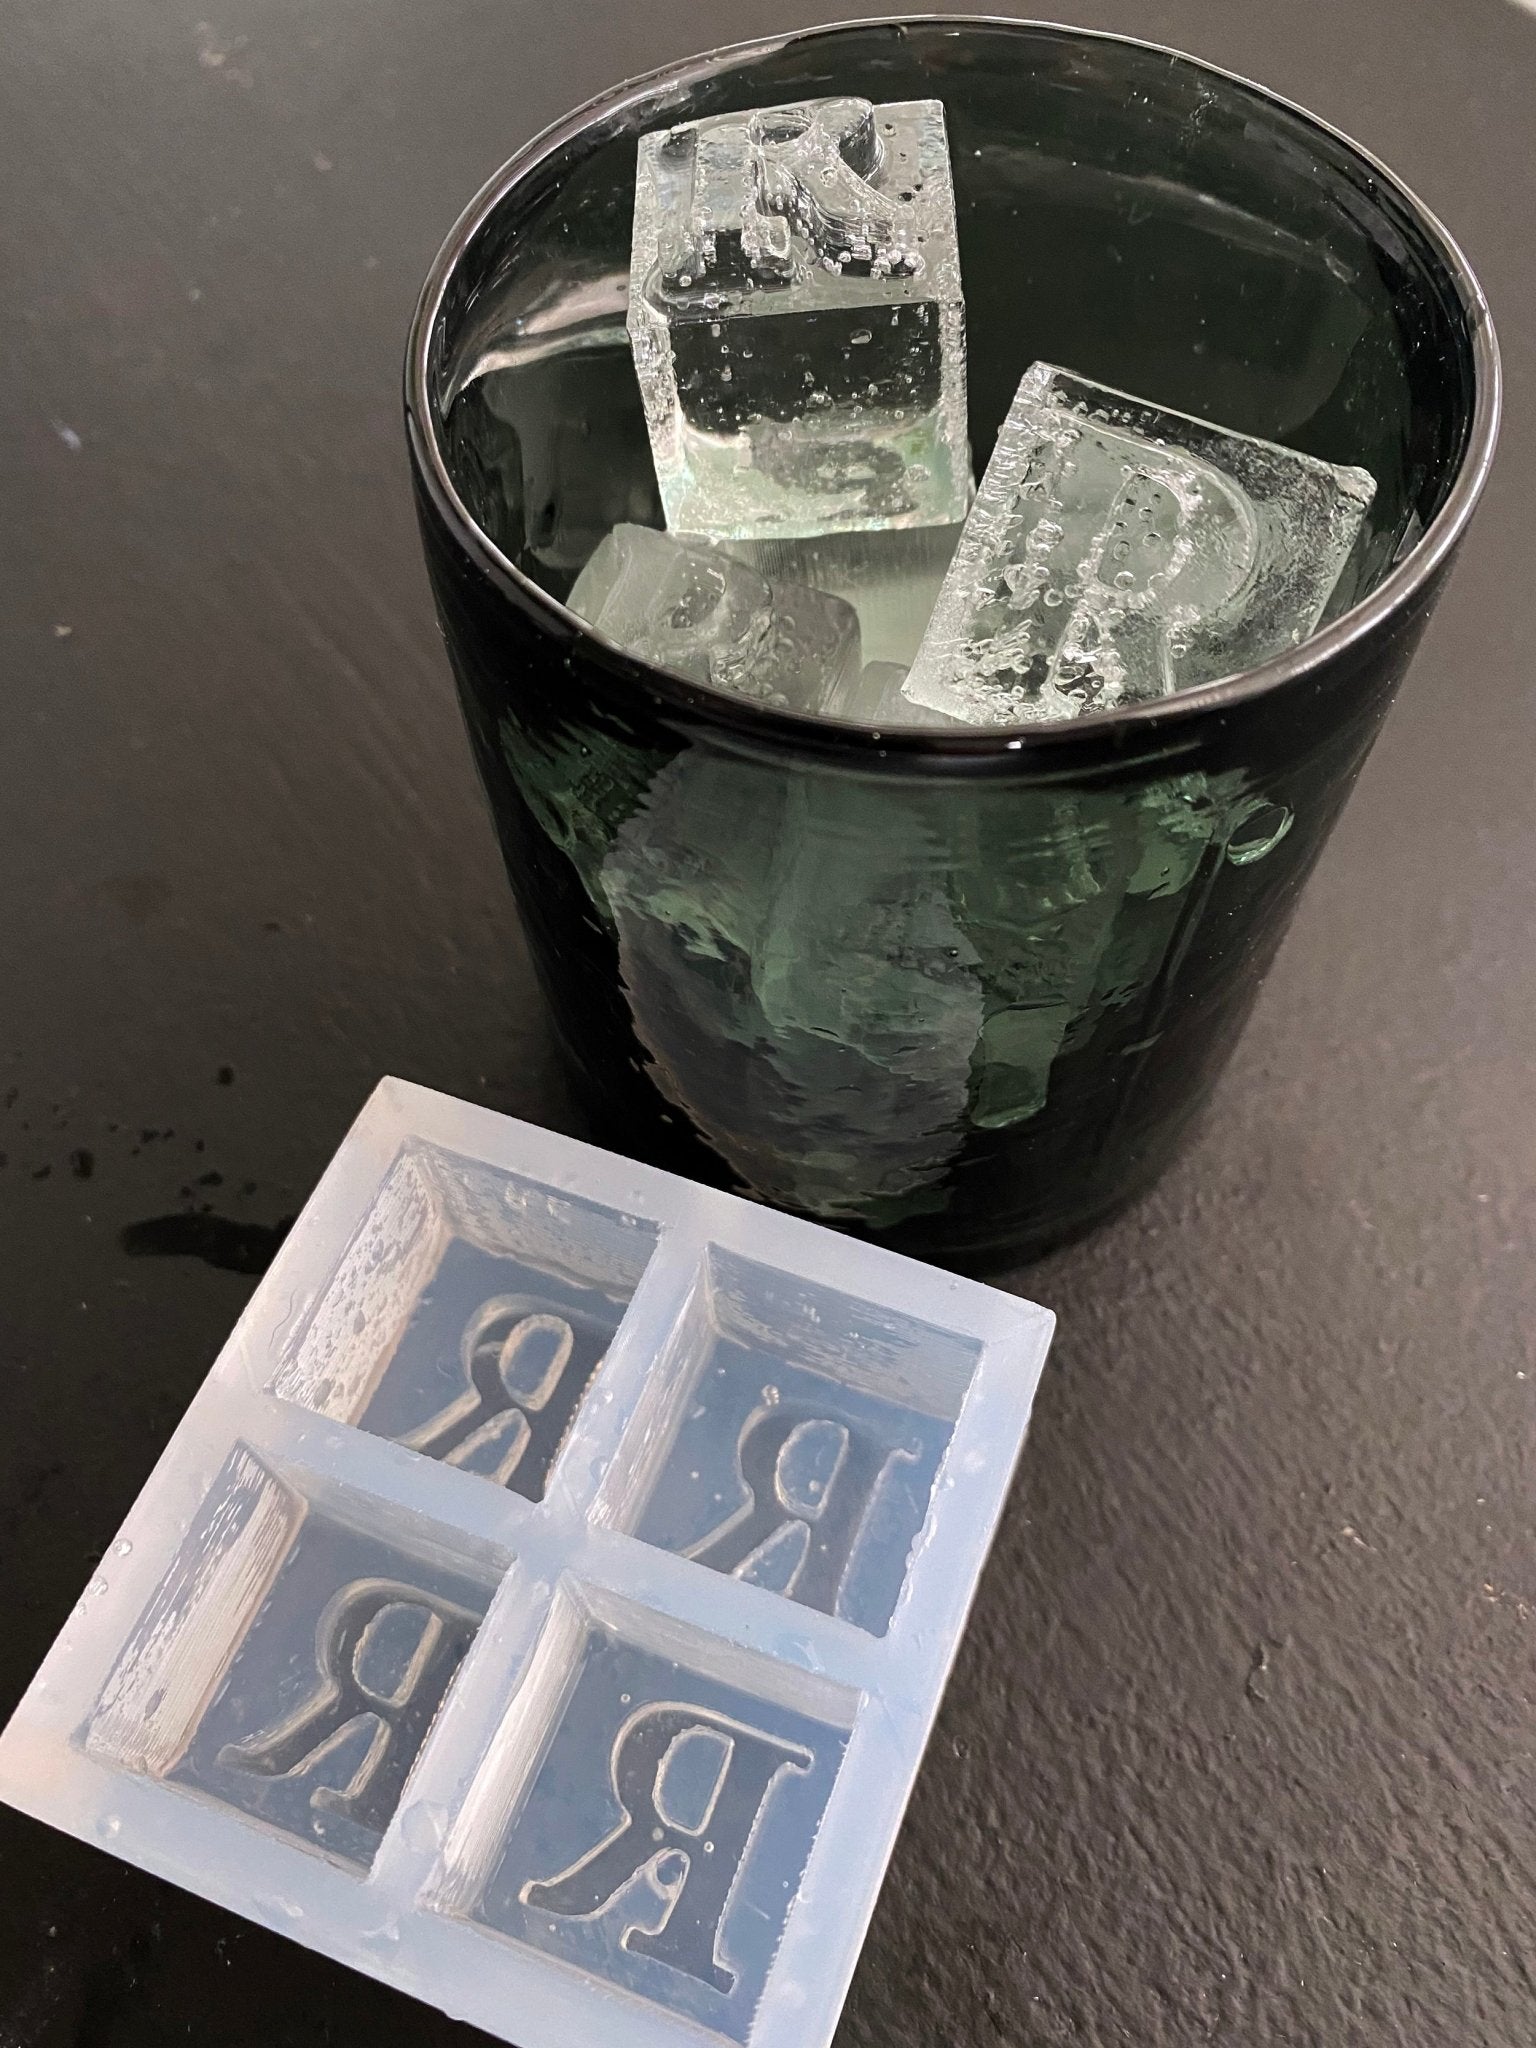  Personalized Silicone Ice Cube Mold Tray with Monogram